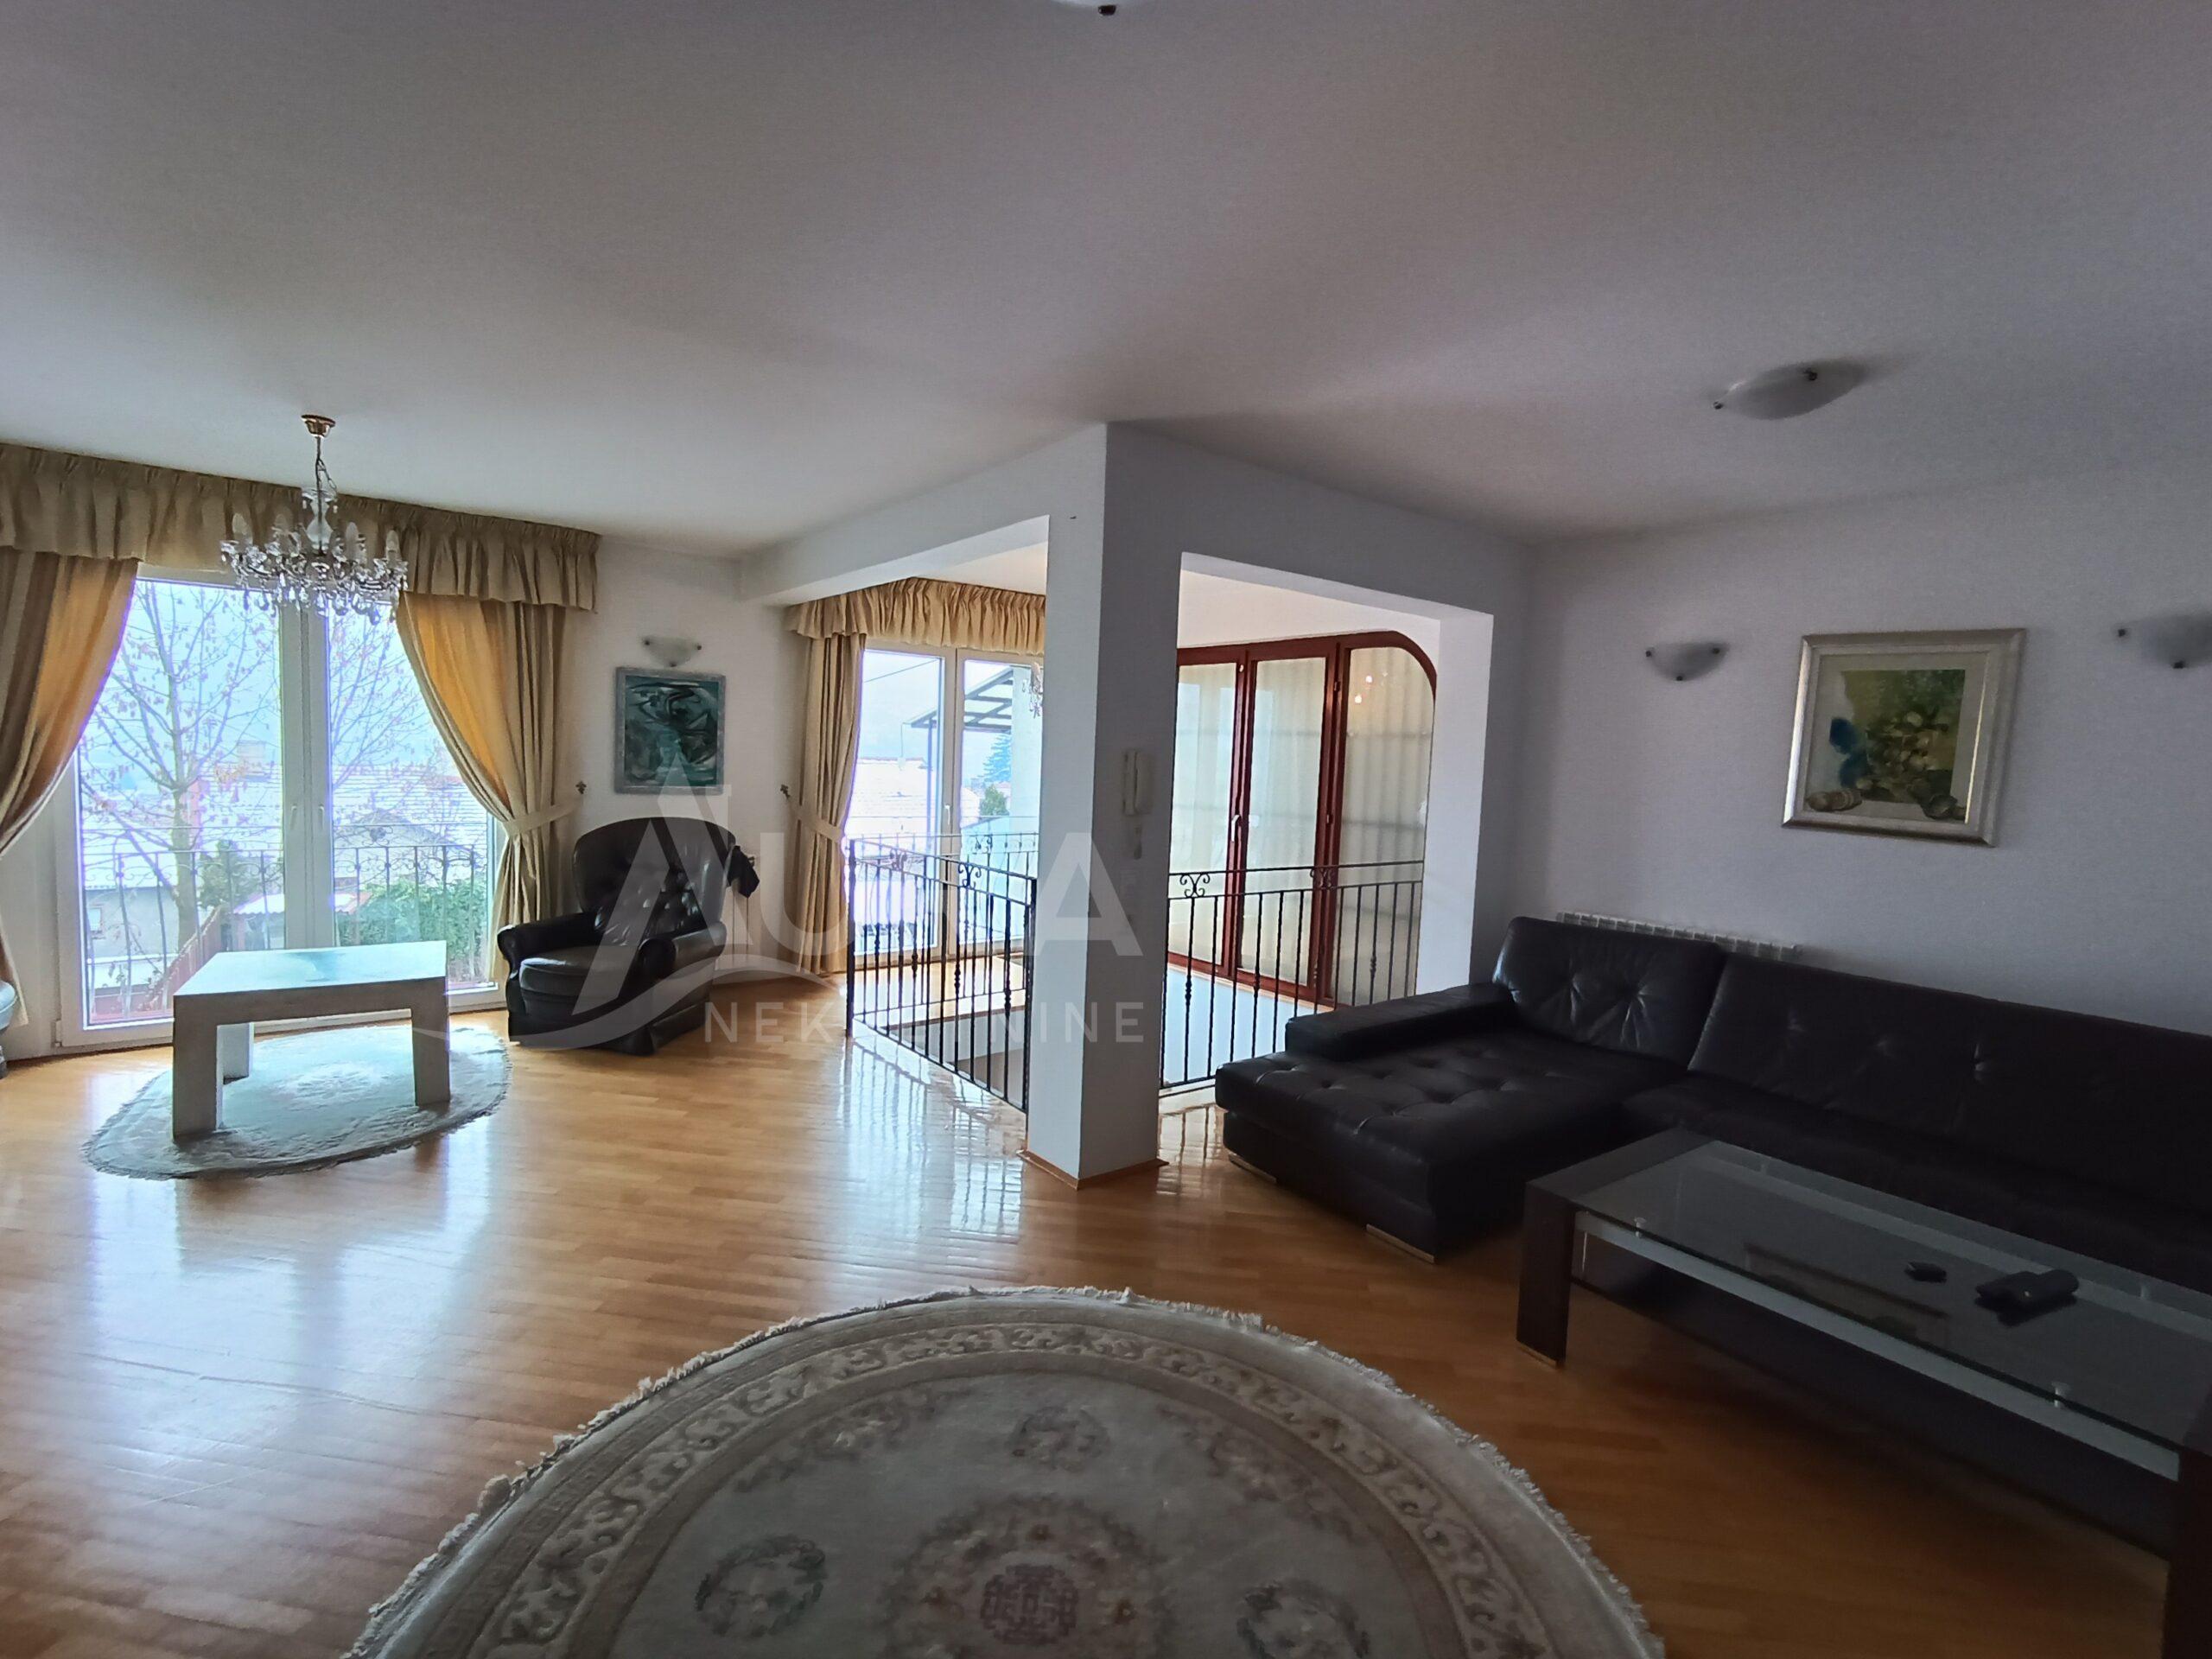 Extra house for rent / 250m2 /Sarajevo / Old town